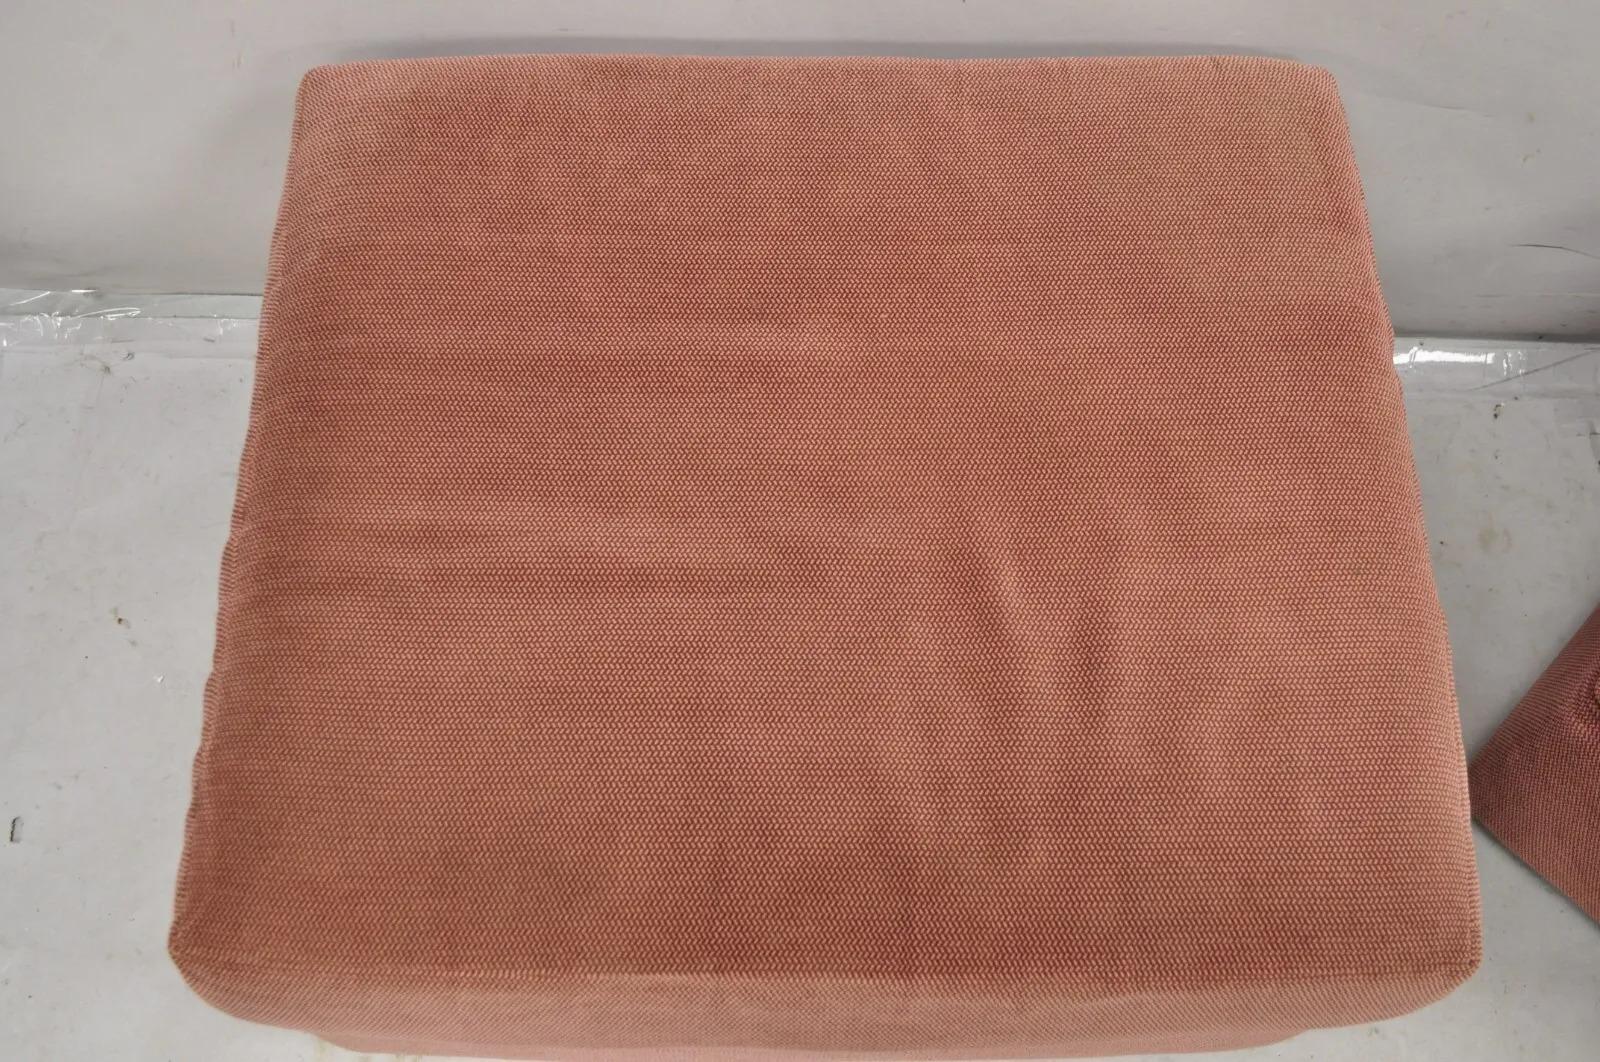 Fabric Thayer Coggin Modern Upholstered Mauve Color Ottomans on Wheels - a Pair